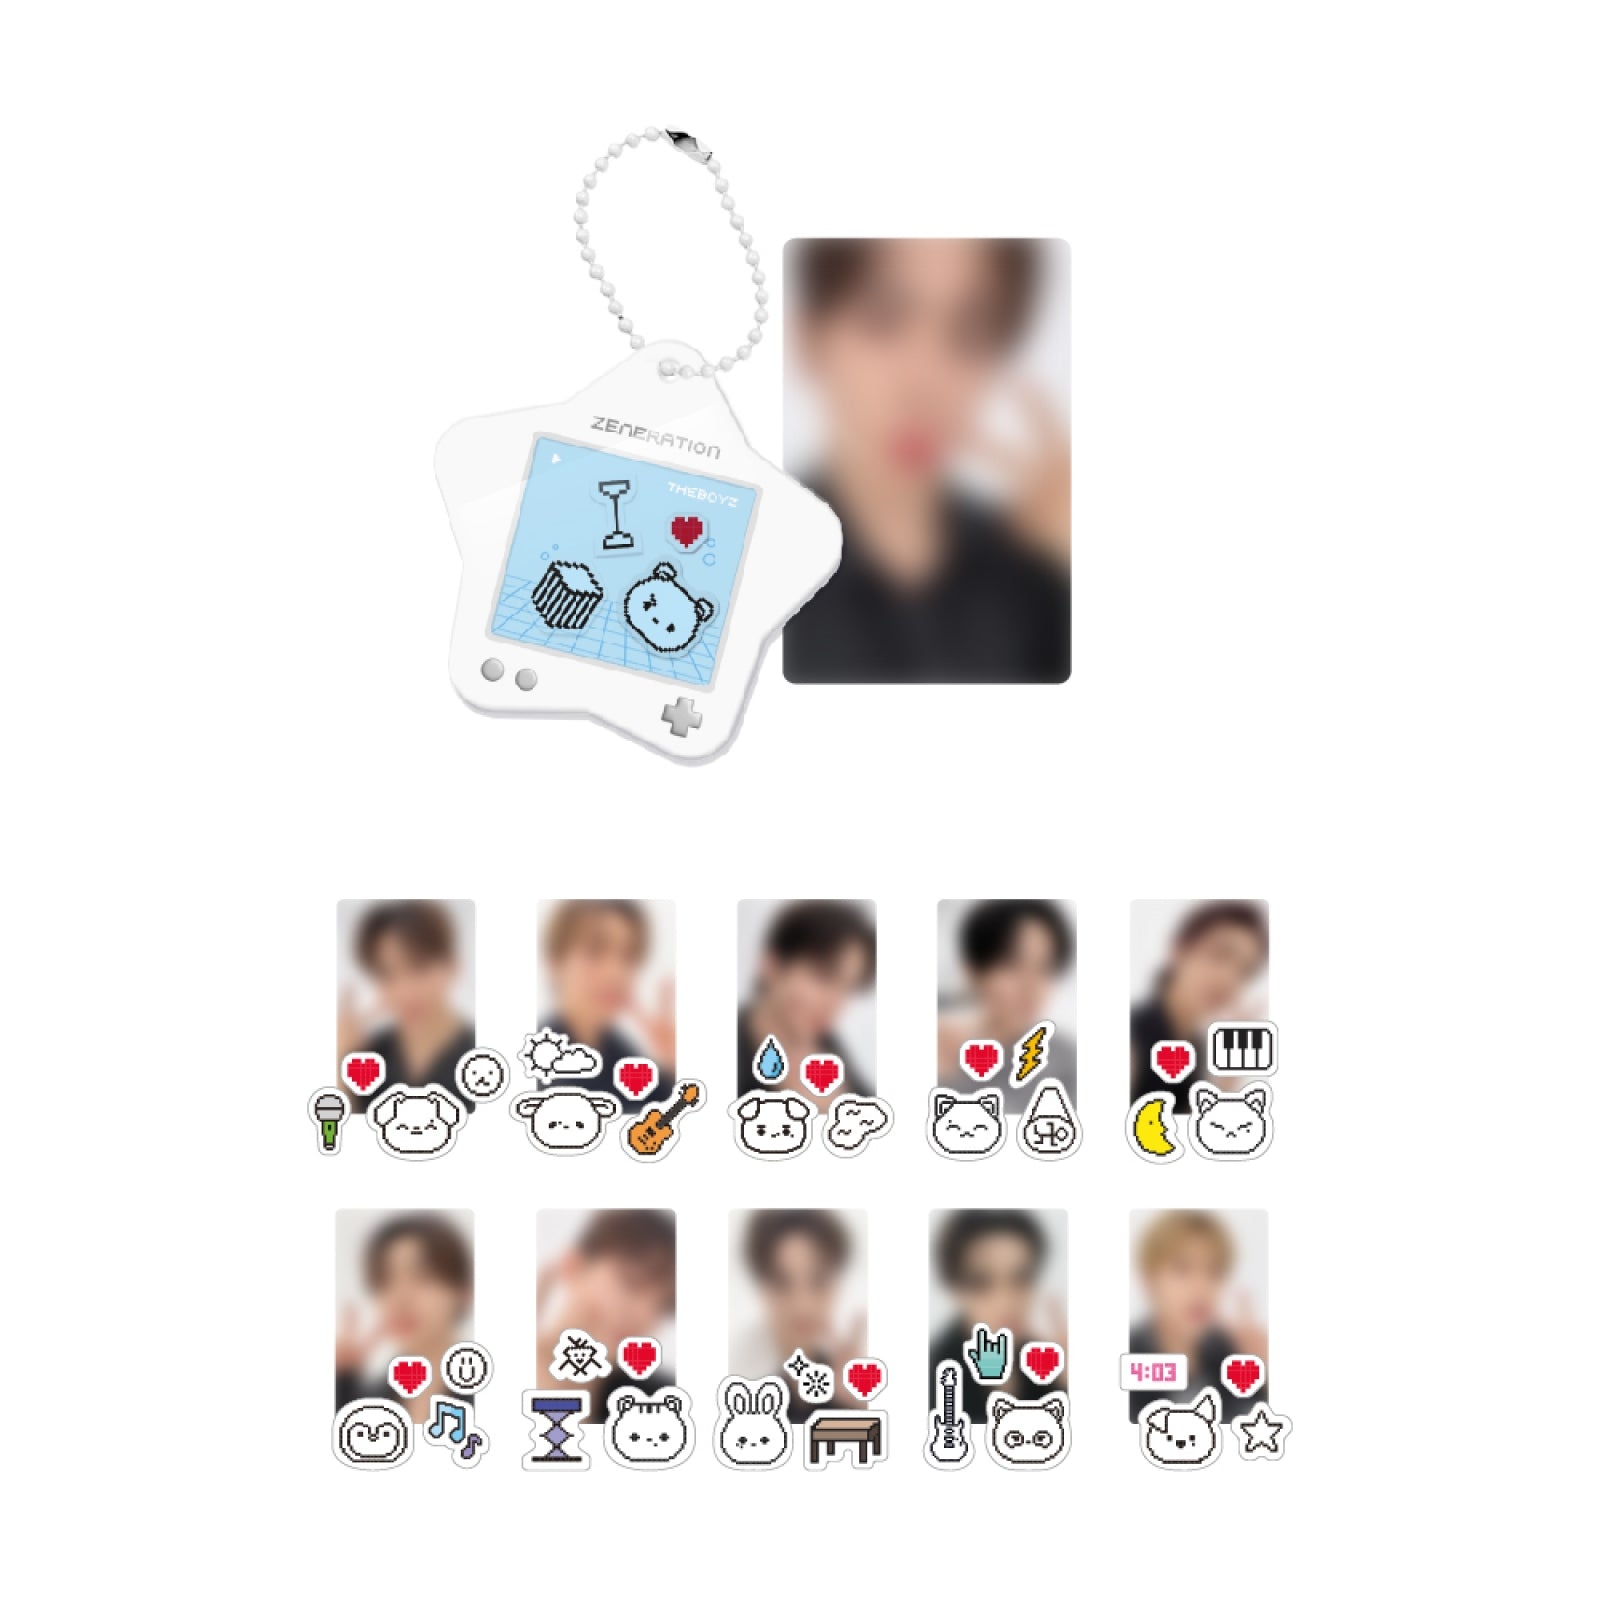 THE BOYZ WORLD TOUR : ZENERATION2 OFFICIAL MD - 04. THE TOYZ SHAKER KEYRING (PRE-ORDER)